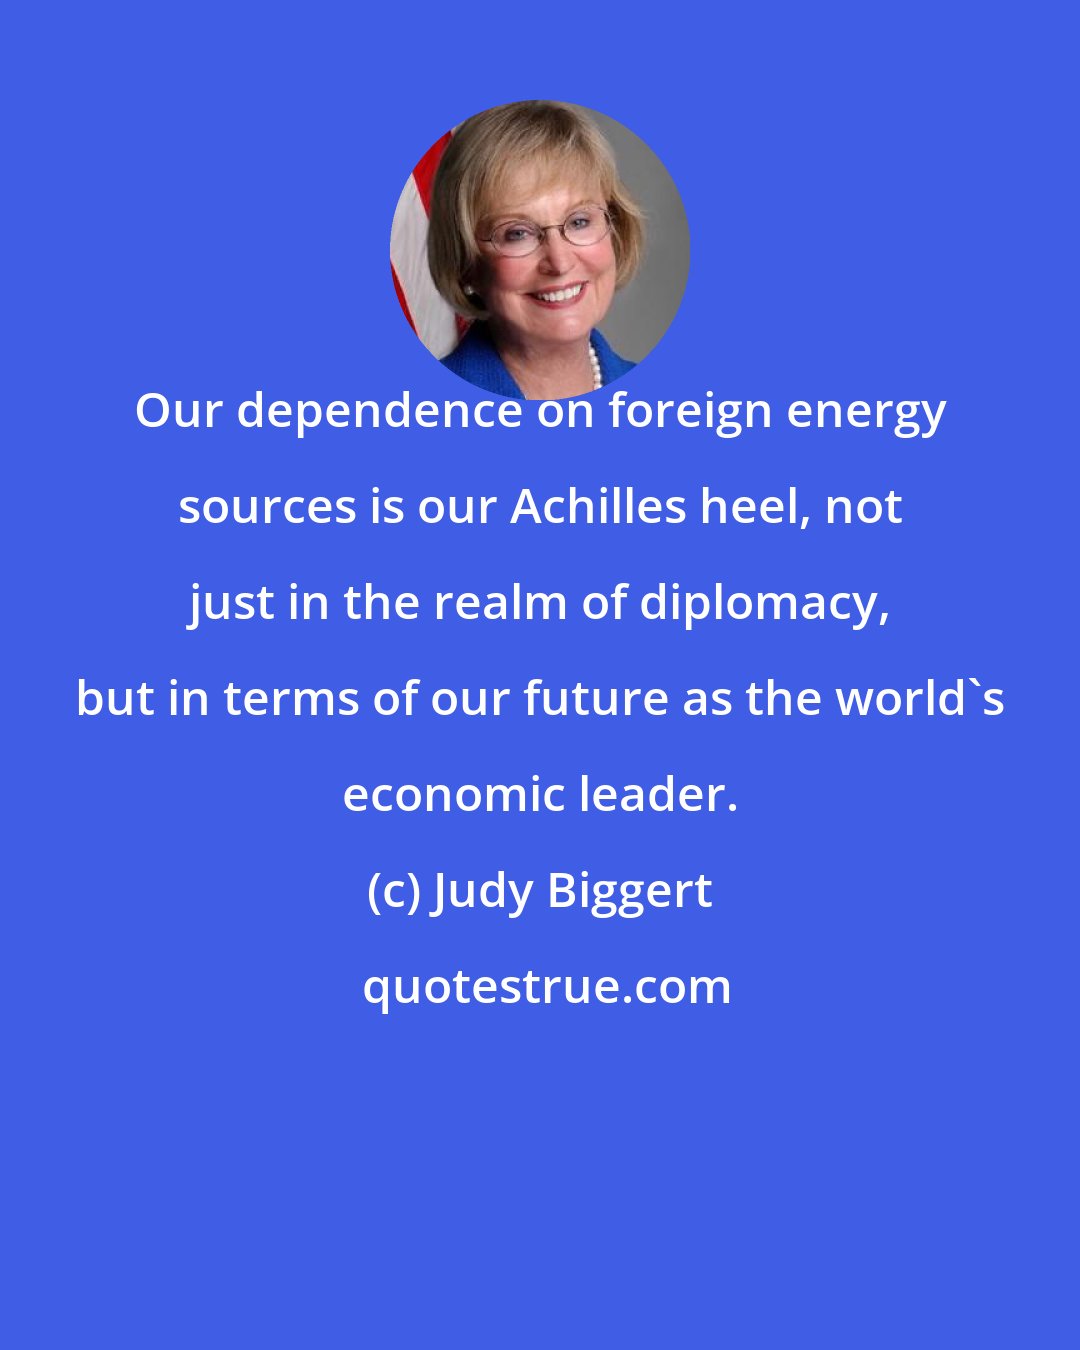 Judy Biggert: Our dependence on foreign energy sources is our Achilles heel, not just in the realm of diplomacy, but in terms of our future as the world's economic leader.